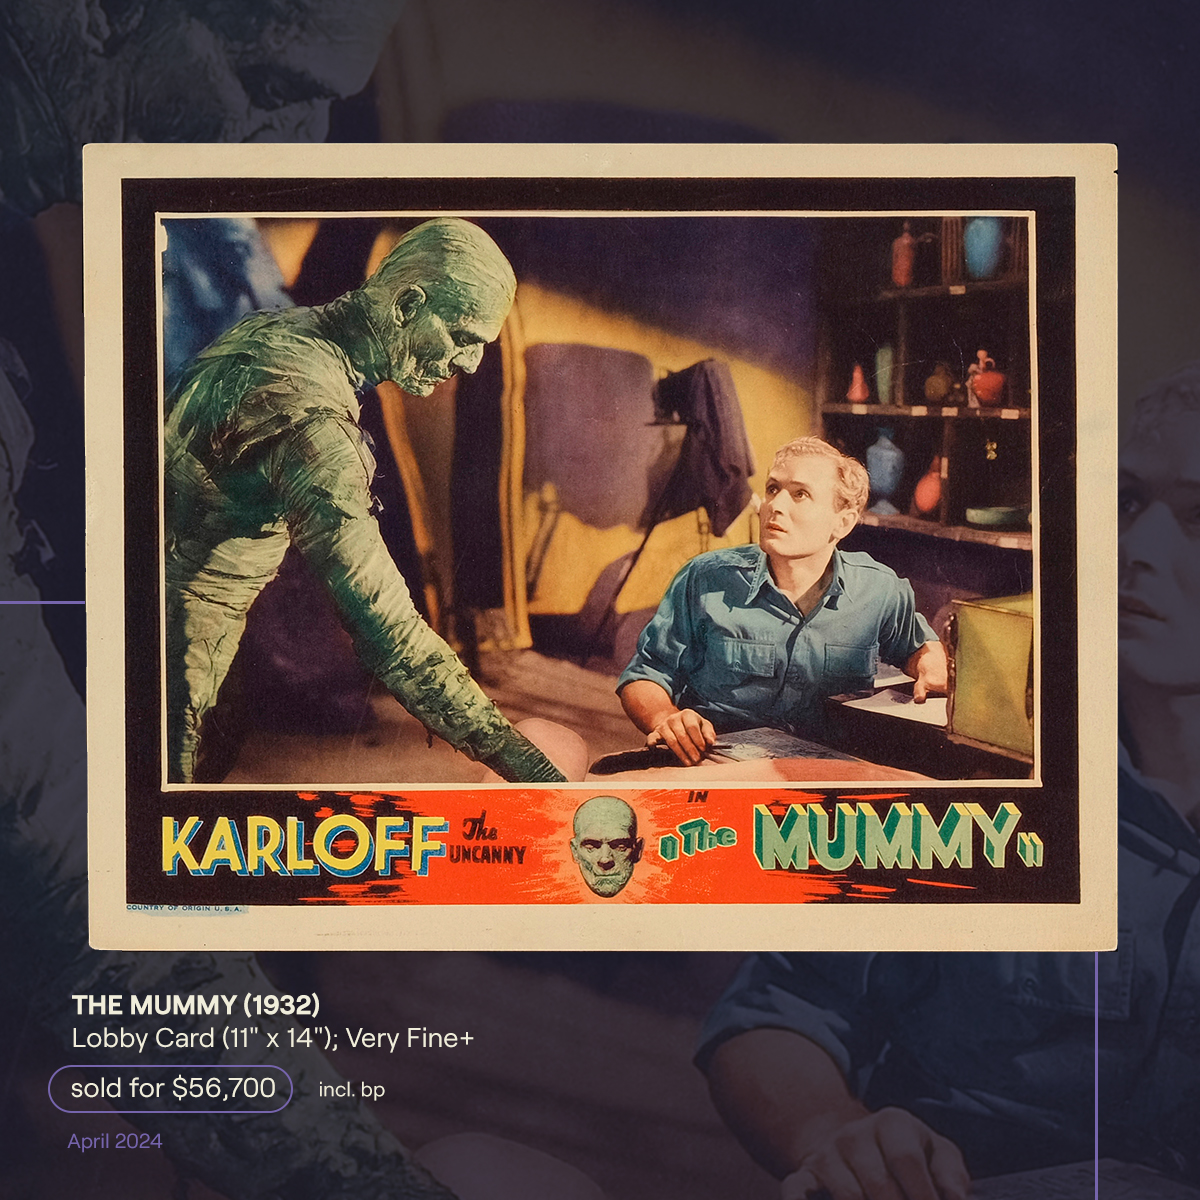 With our LA #PropstorePosterAuction all wrapped up, let's take a look at this incredible highlight from the event! This original lobby card for The Mummy (1932) sold for $56,700 (incl. B.P.)—a true piece of treasure for any cinema archeologist!